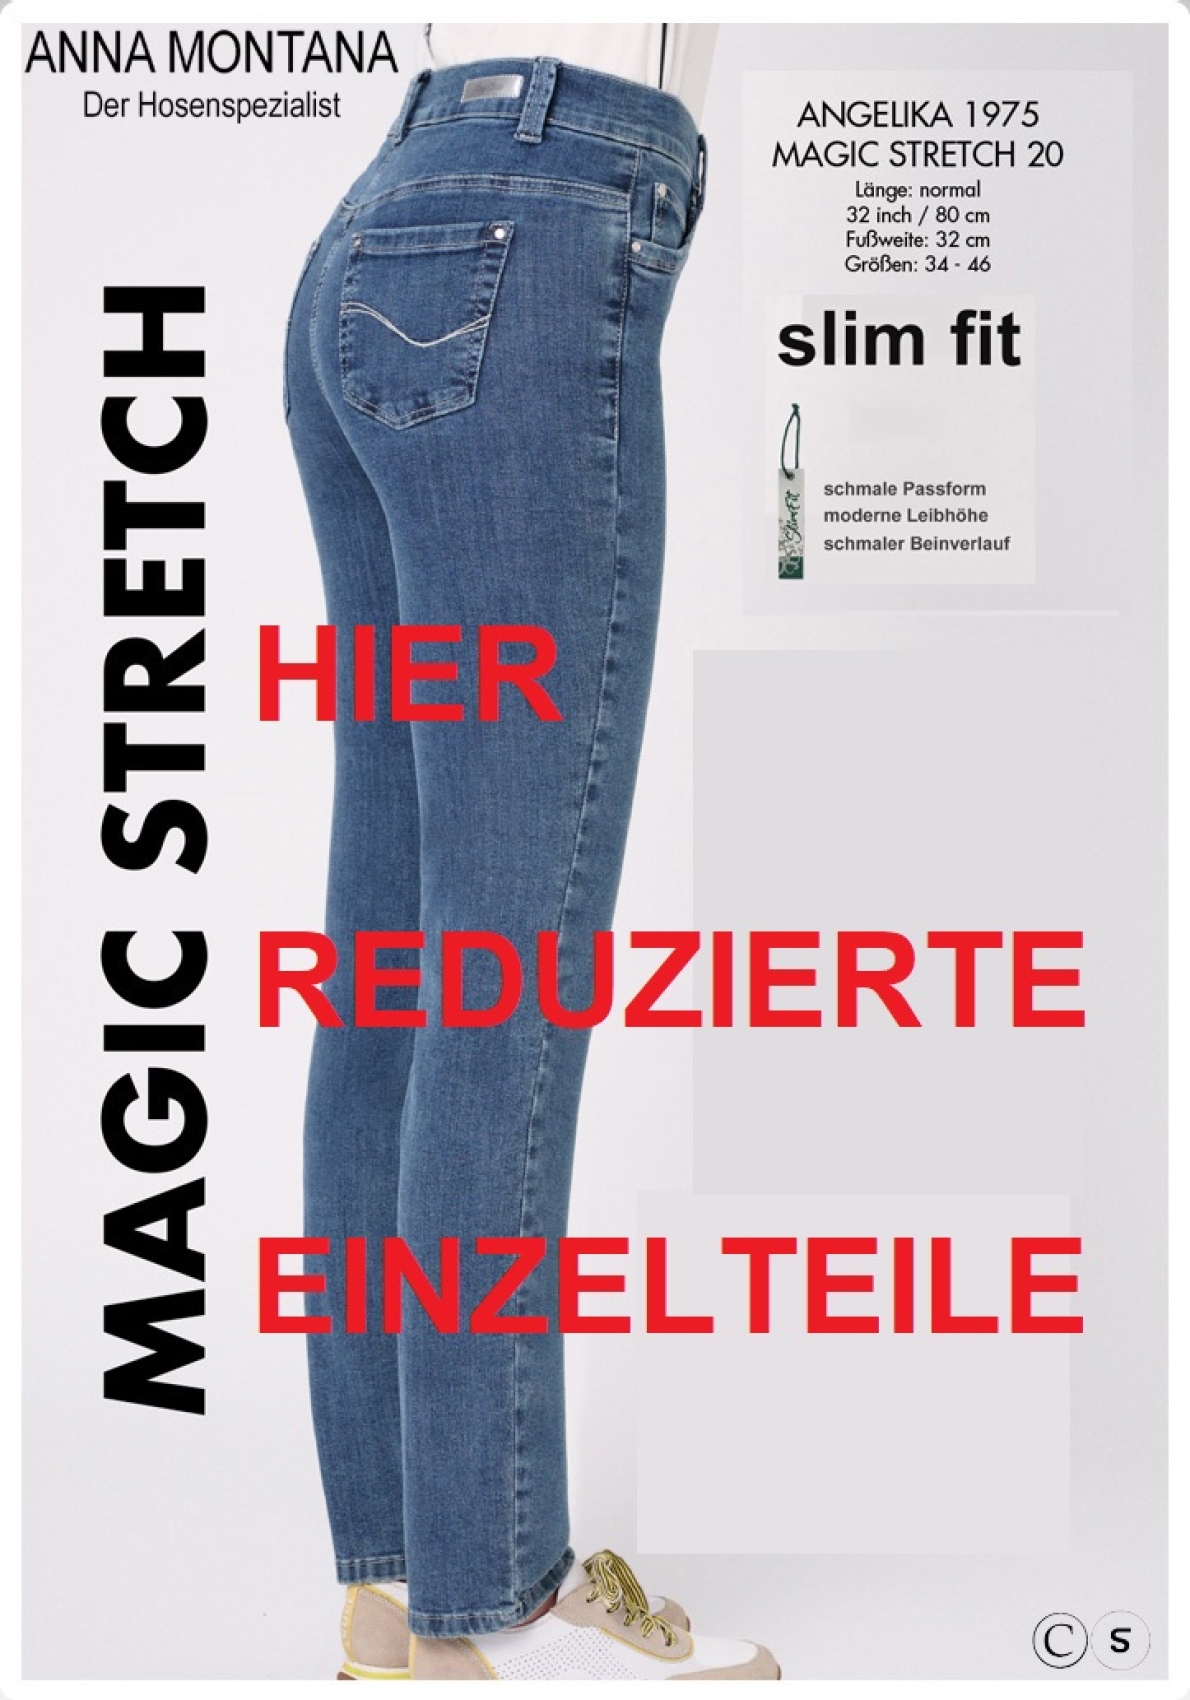 Angelika 1975, reduces / ER / Magic Stretch Trousers /Jeans ANNA MONTANA